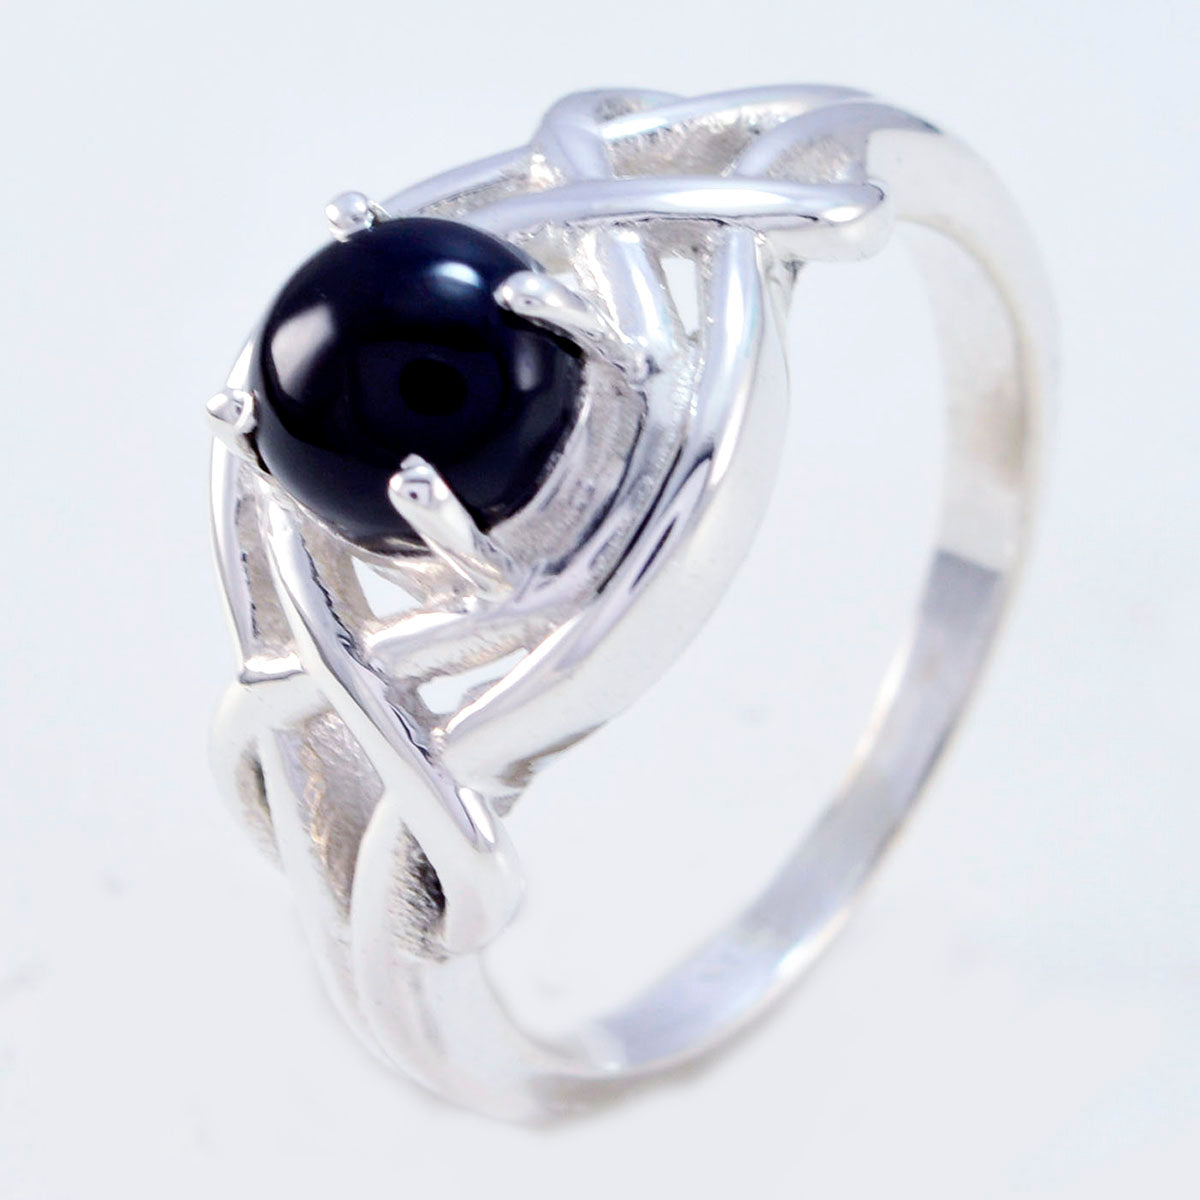 Excellent Gem Black Onyx 925 Sterling Silver Ring Infinity Jewelry